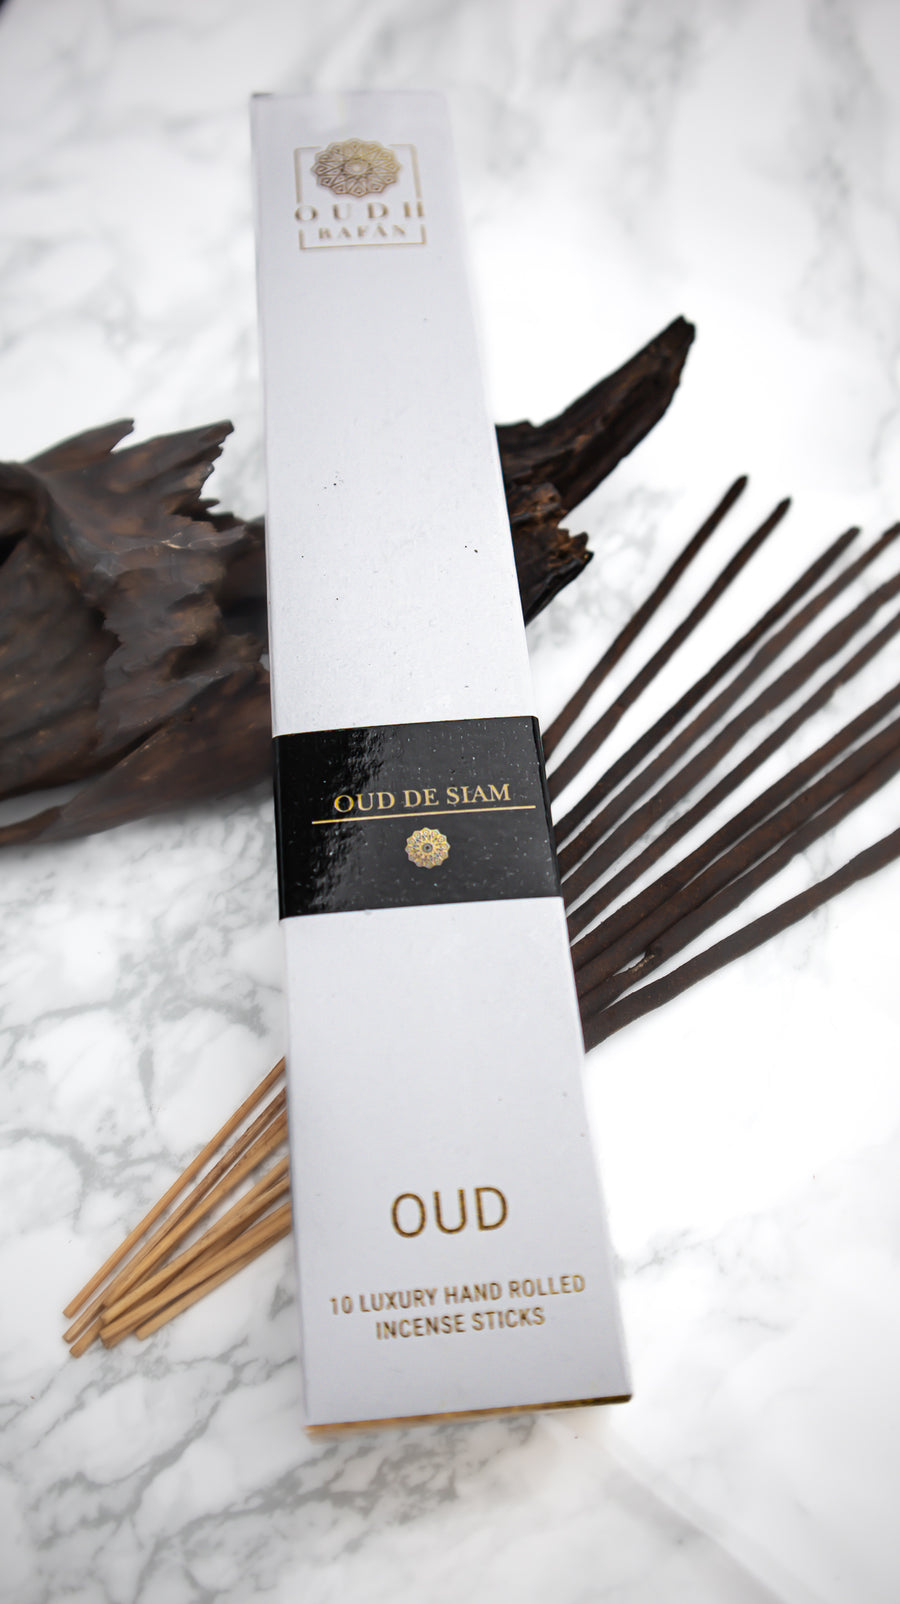 Oud de Siam - Organic Hand-rolled incense sticks coated with oud.  Infused with amber & oud. - Box of 10